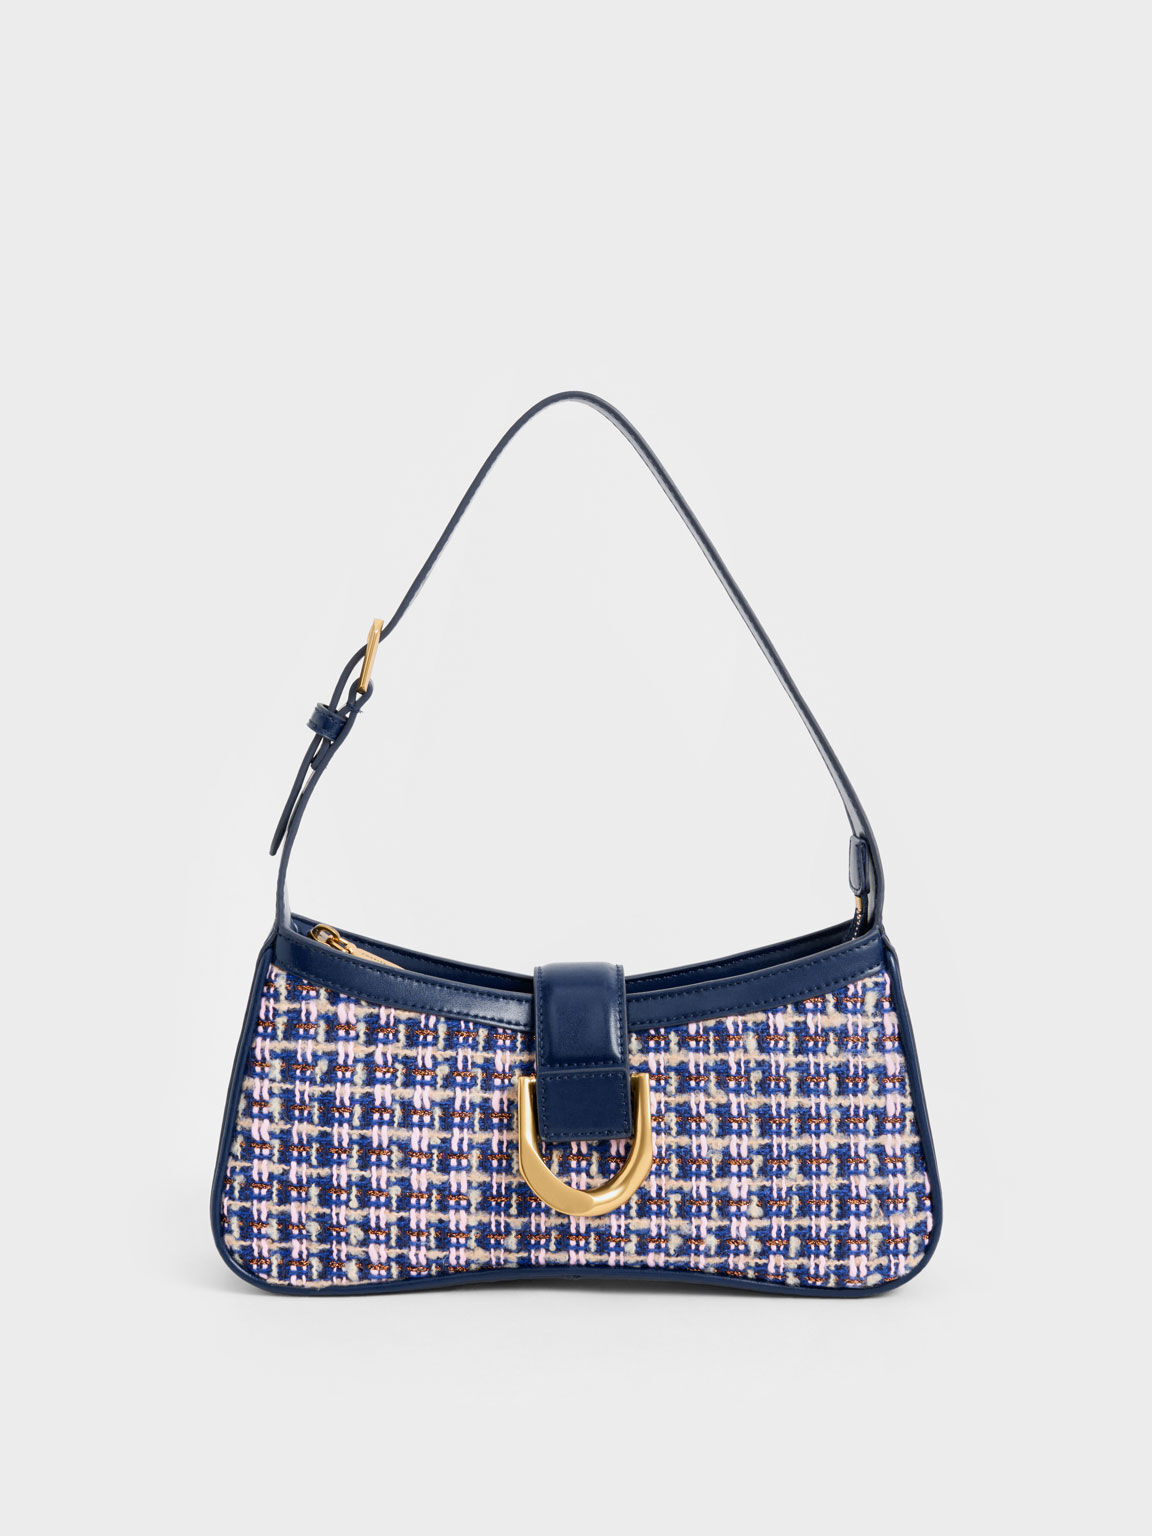 Women's Bags | Shop Exclusive Styles - CHARLES & KEITH TW